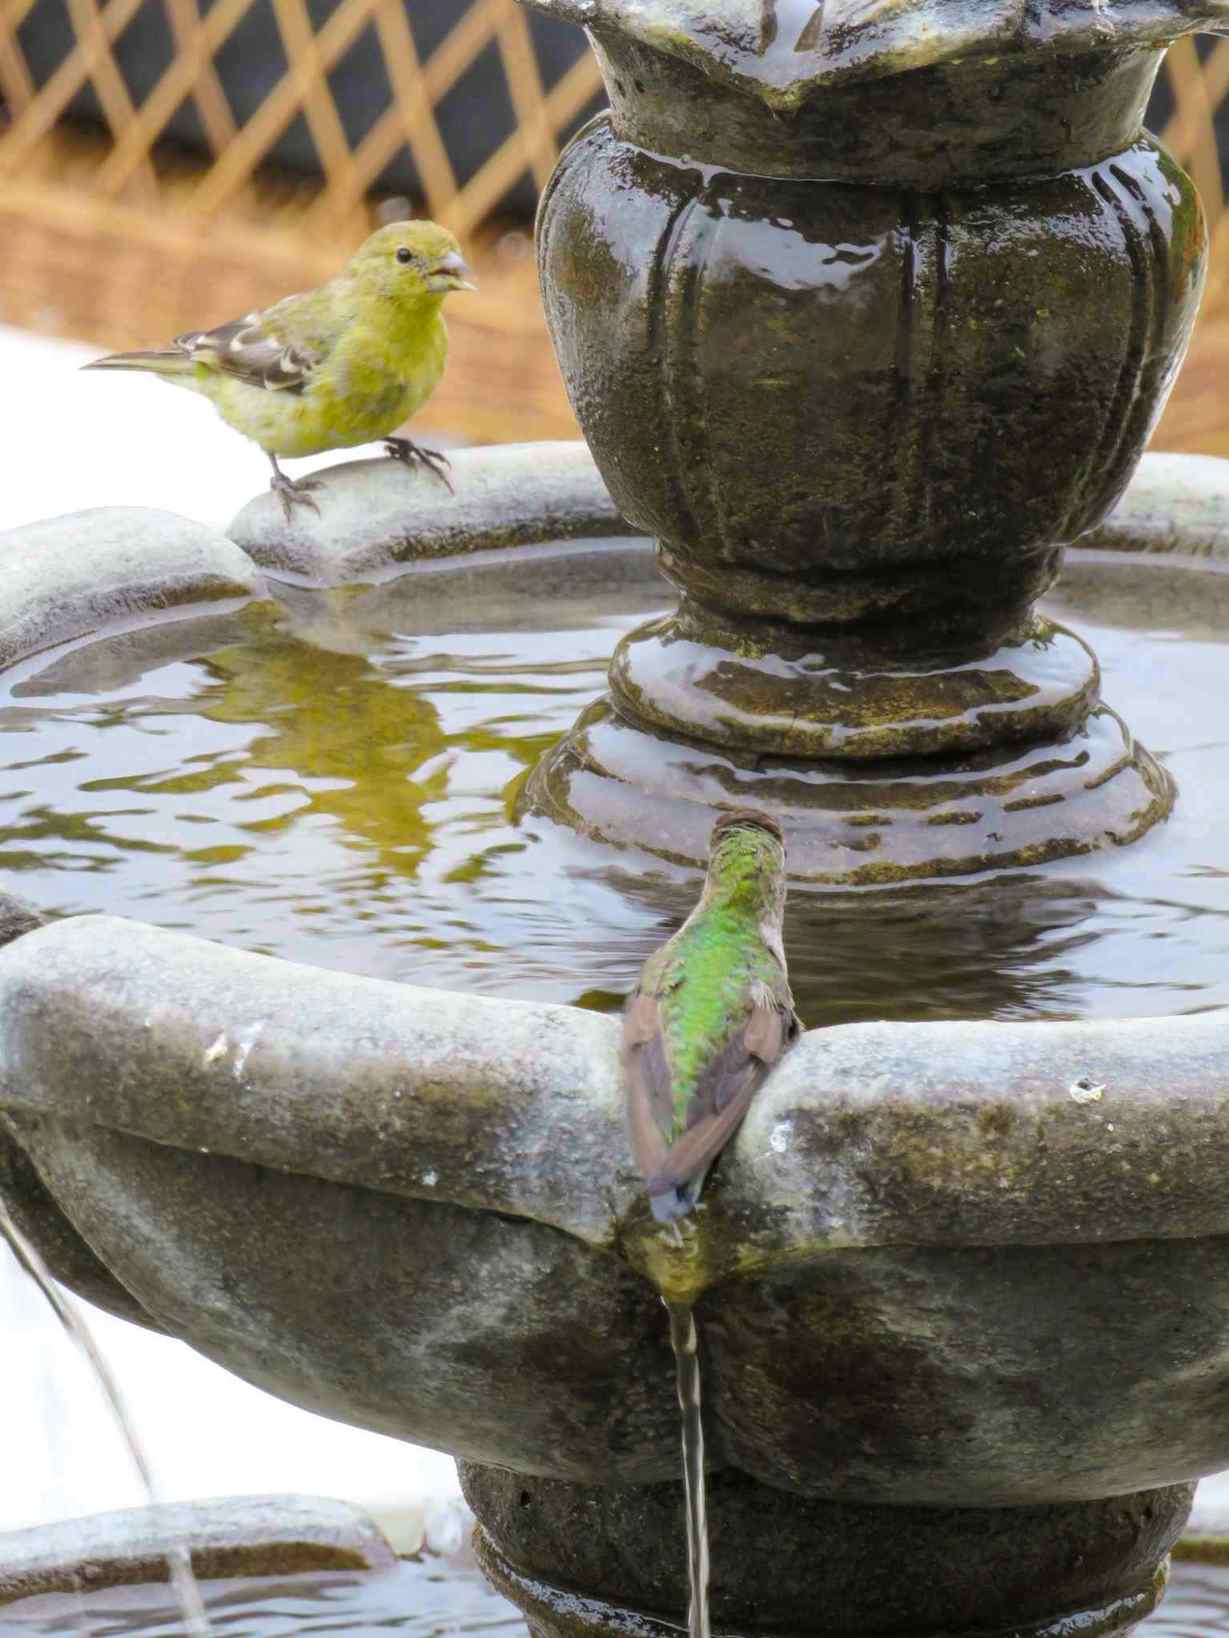 A larger water fountain has a Lesser Goldfinch and an Anna's hummingbird resting on the ledge in front of a pool of water. Attract a variety of birds to your garden with various water features and baths. 